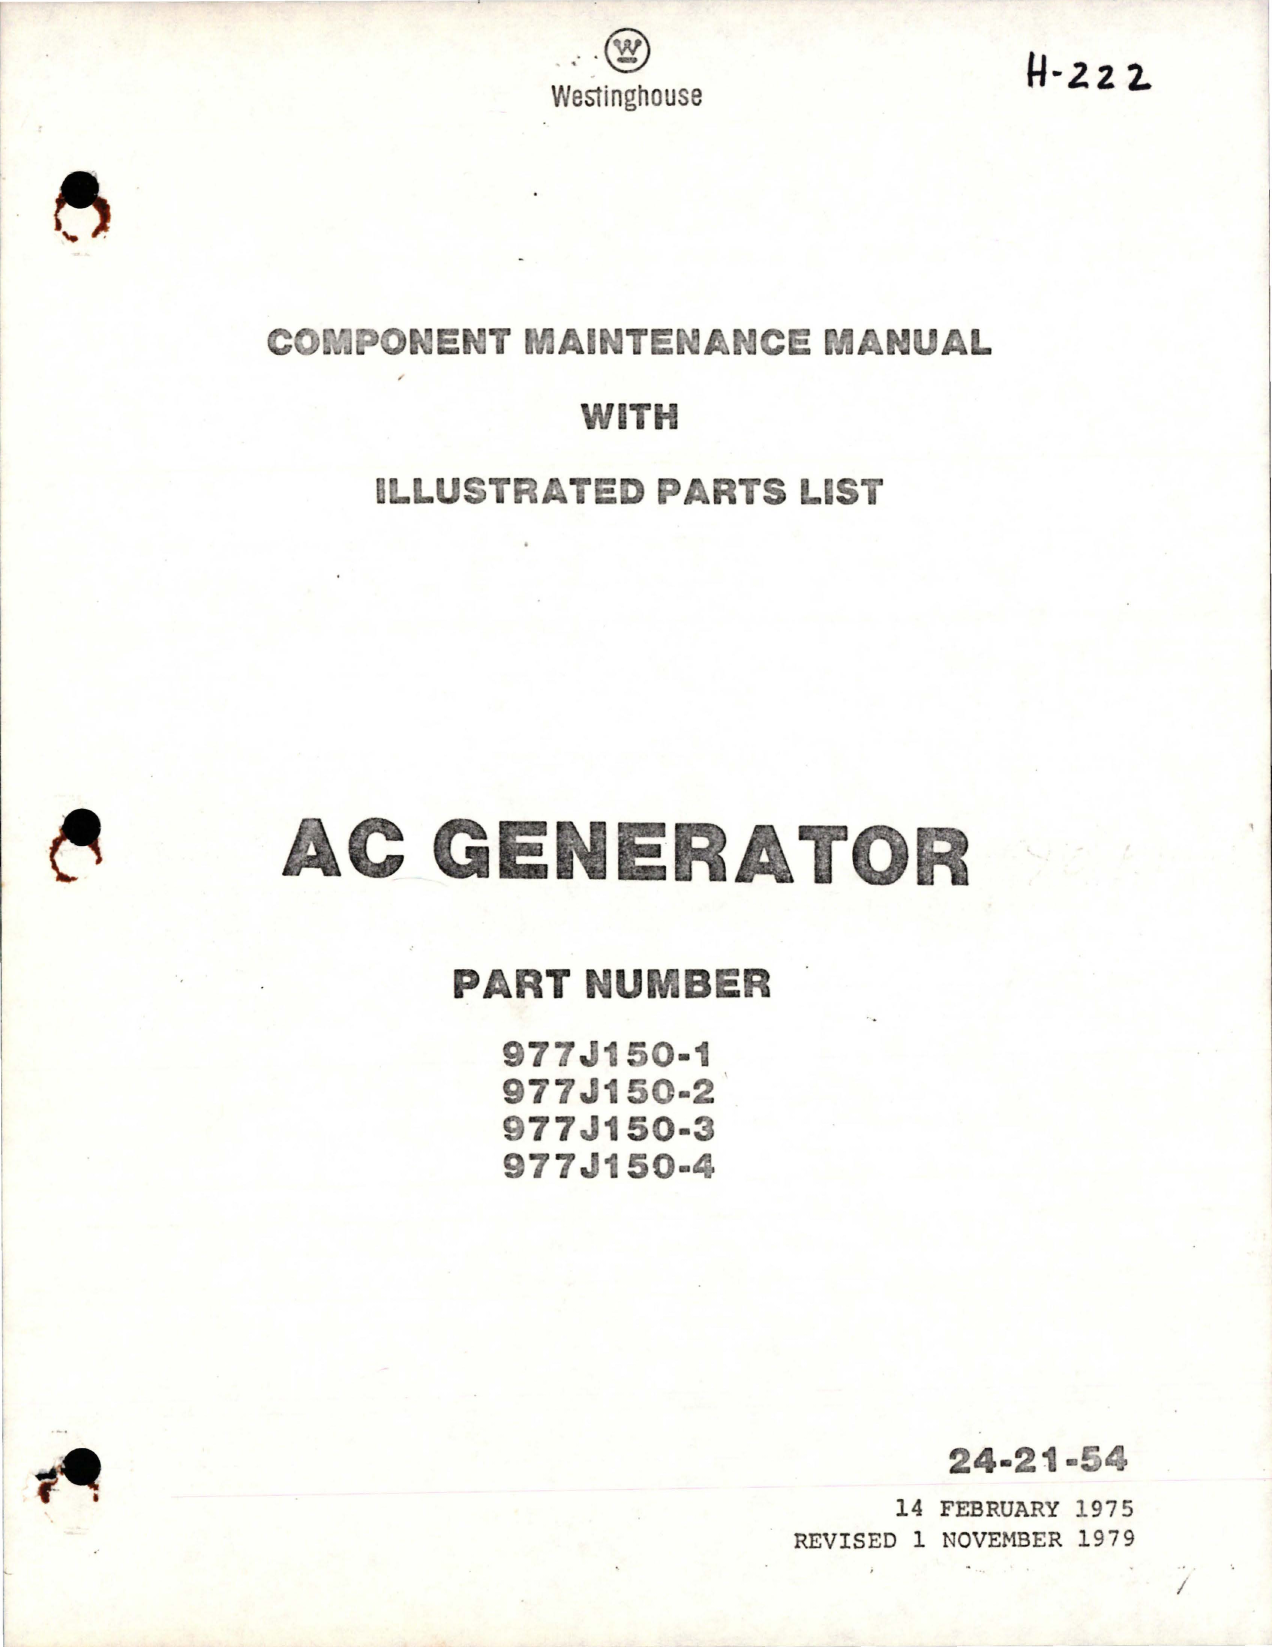 Sample page 1 from AirCorps Library document: Maintenance Manual with Illustrated Parts List for AC Generator - Parts 977J150-1, 977J150-2, 977J150-3, and 977J150-4 